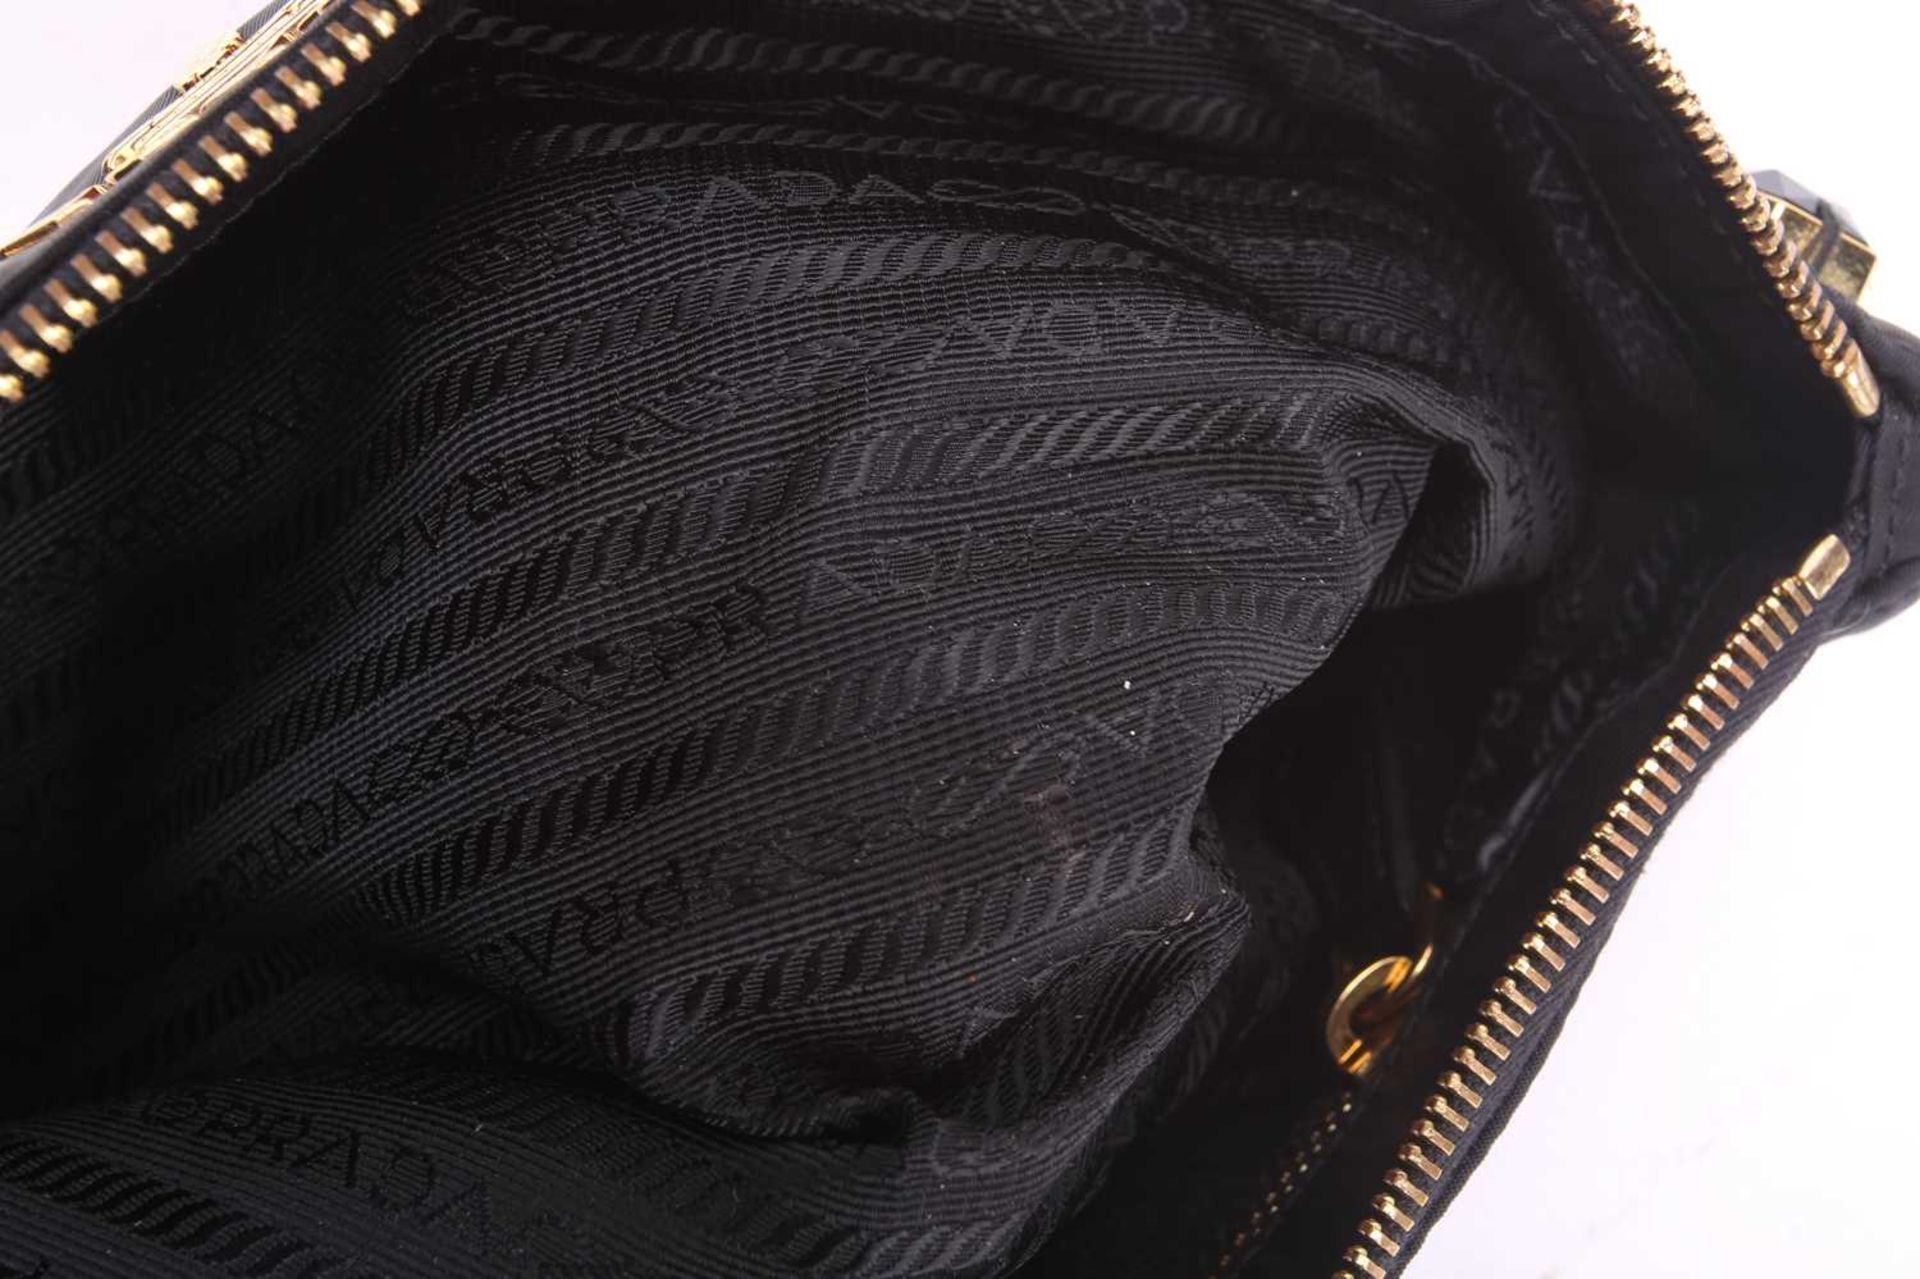 Prada - a bejewelled 'Whips Pietre' clutch in black nylon, from 2009 Resort Collection, with - Image 3 of 5